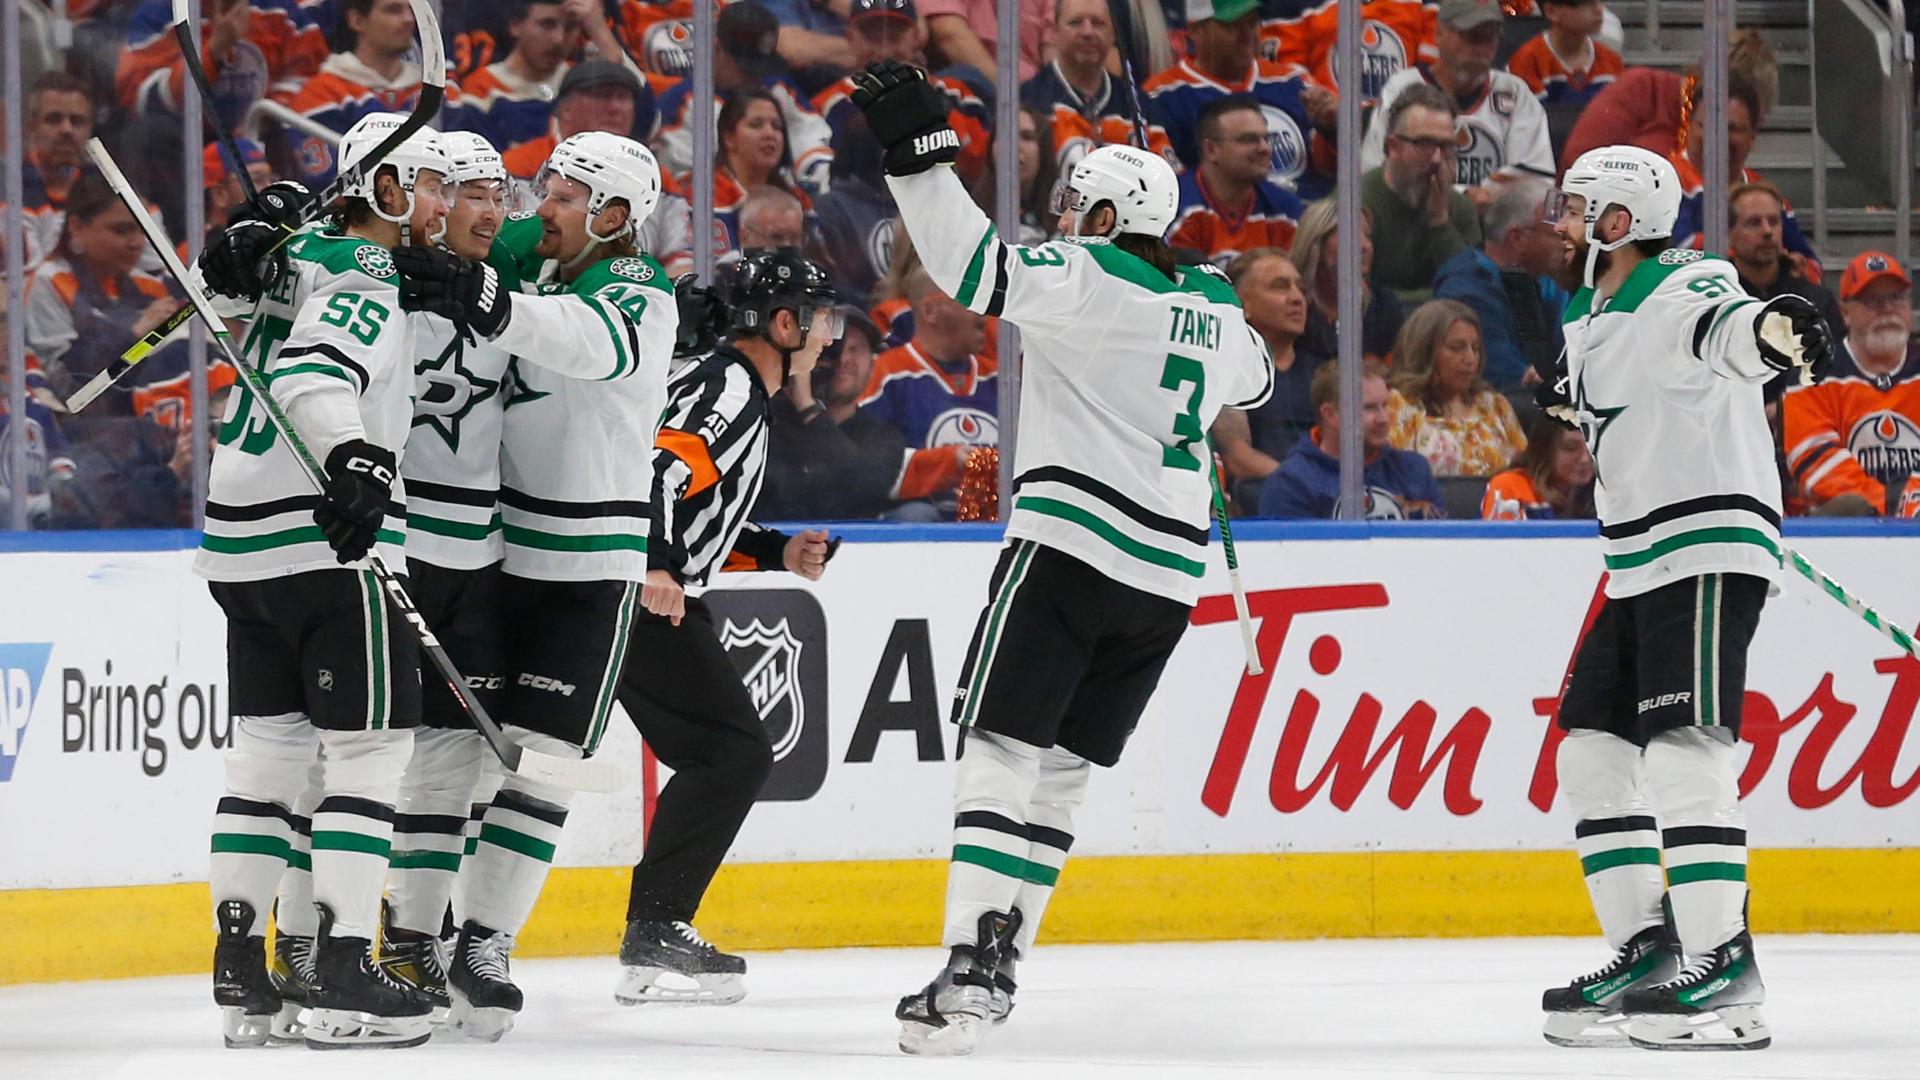 Stars stun Oilers with two quick goals to take lead